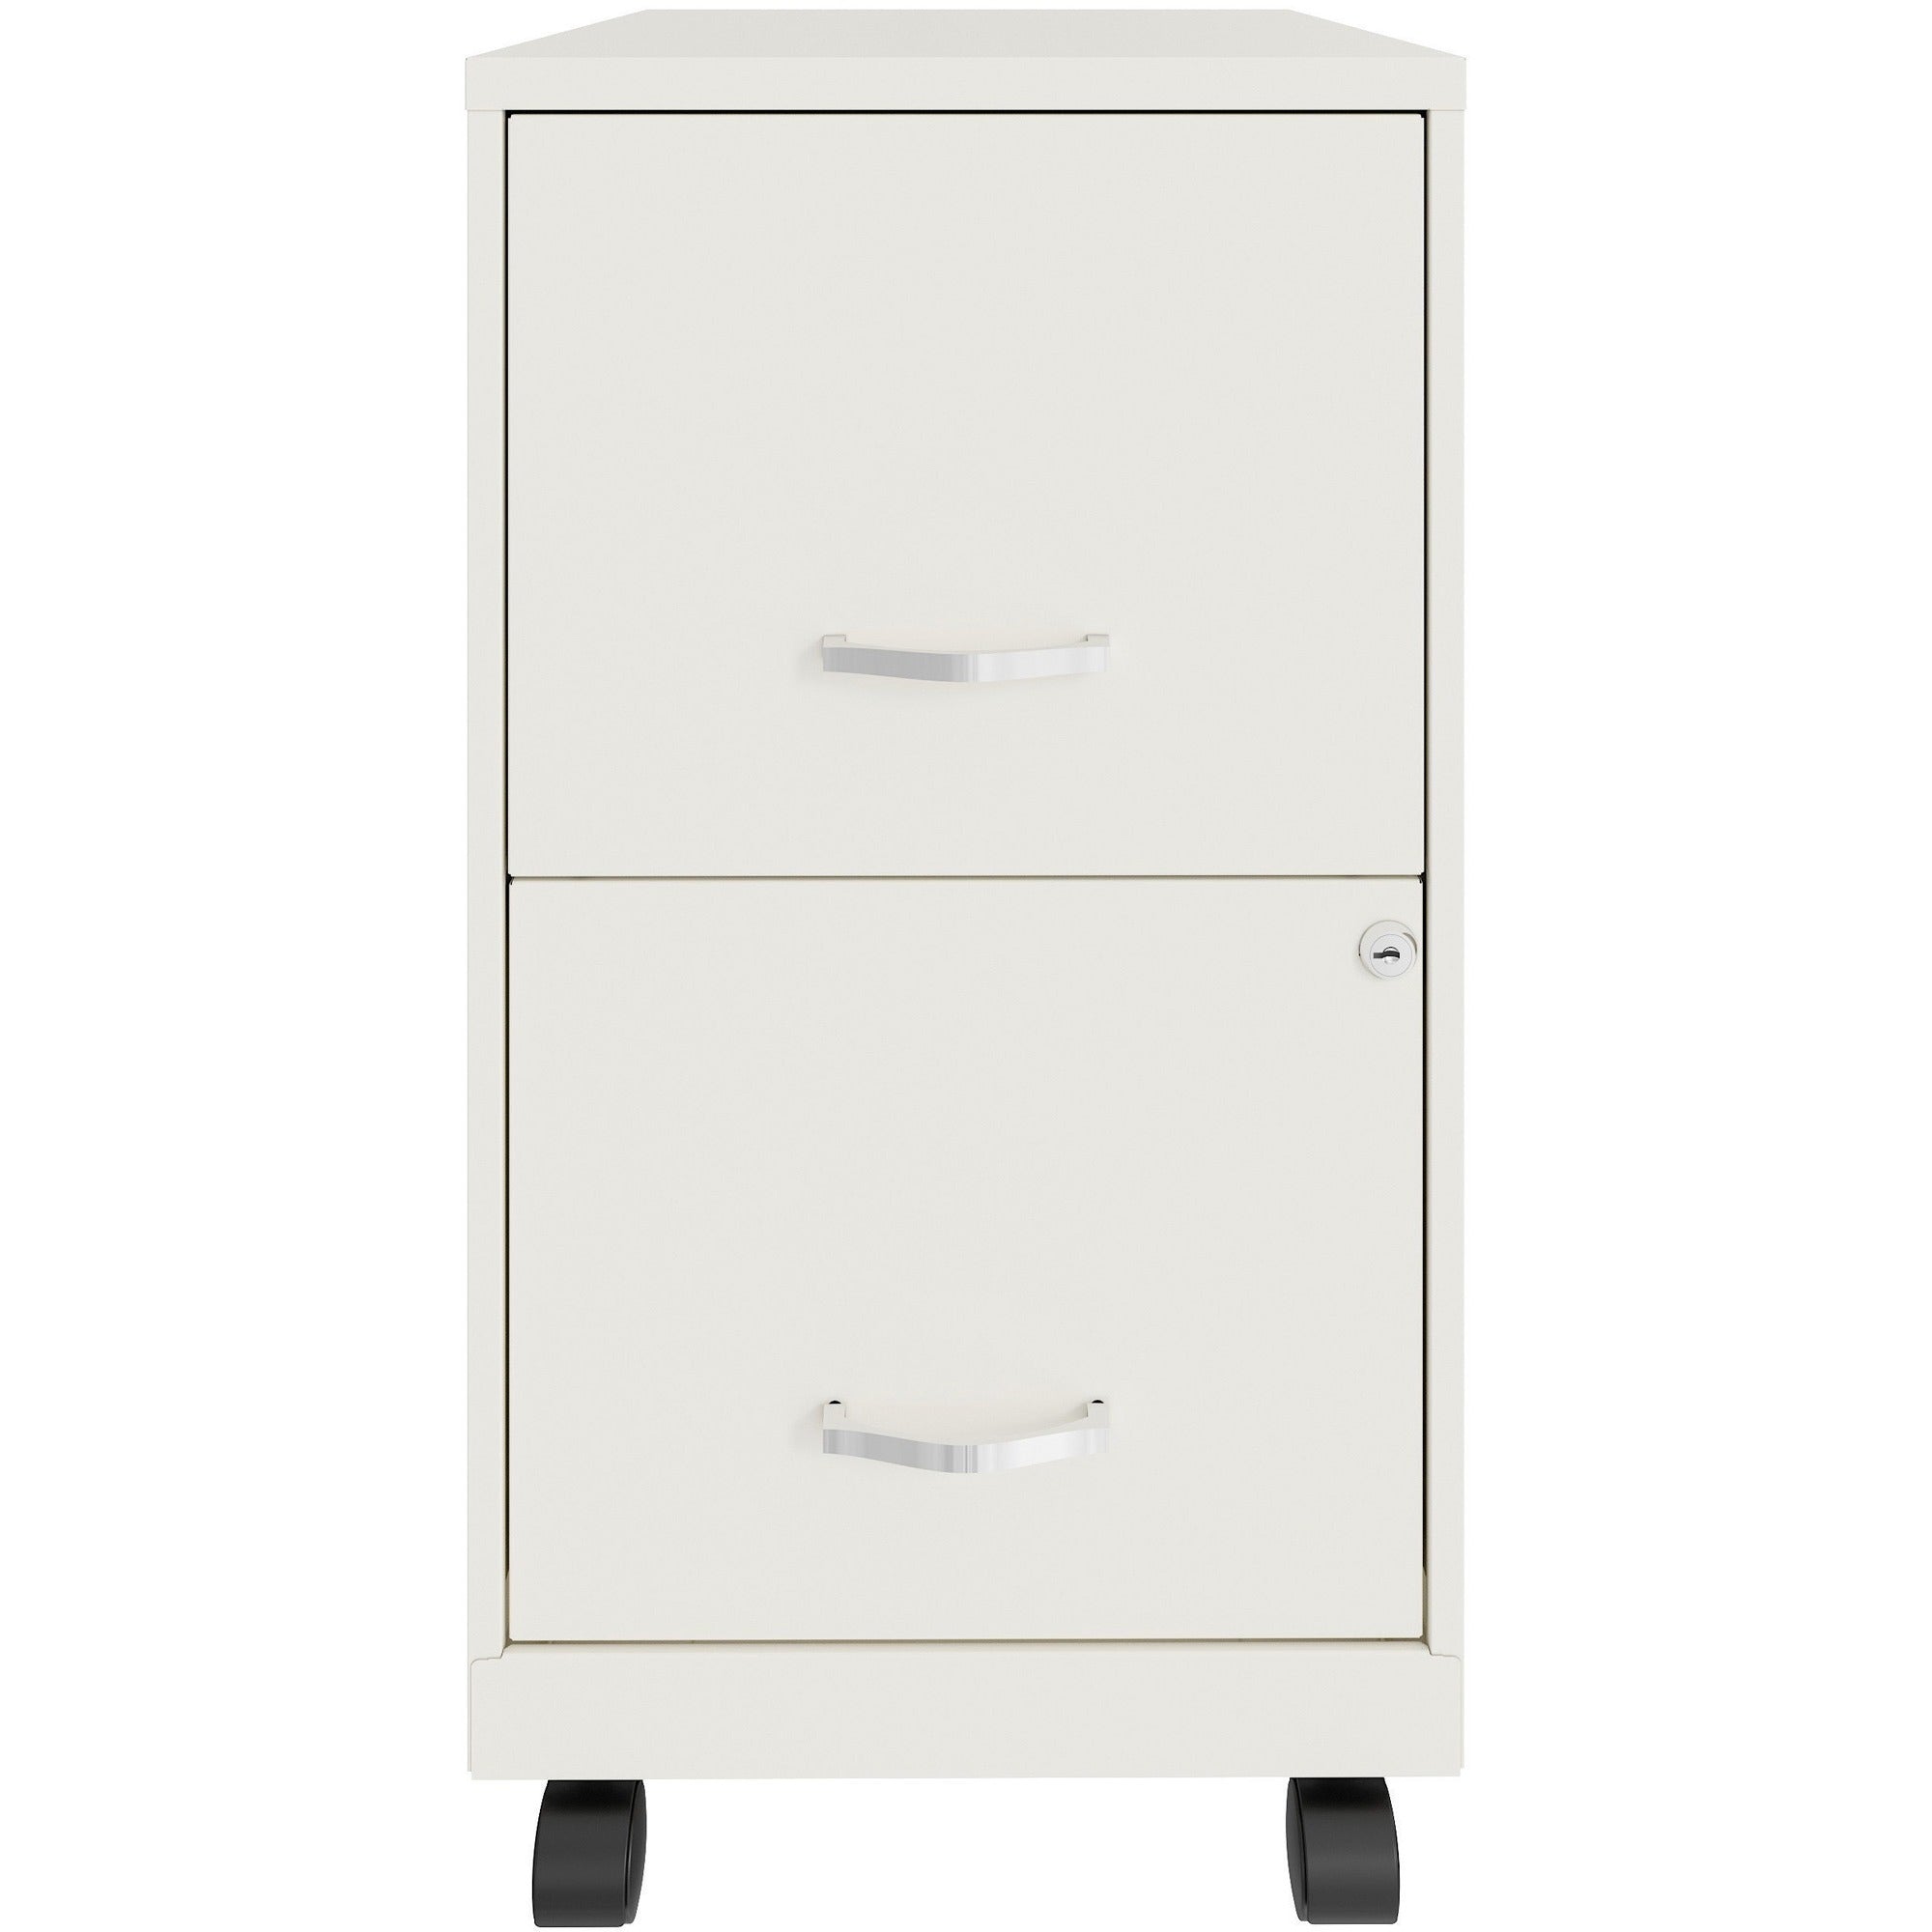 nusparc-mobile-file-cabinet-142-x-18-x-265-for-file-letter-mobility-locking-drawer-glide-suspension-3-4-drawer-extension-cam-lock-nonporous-surface-white-painted-steel-steel-recycled-assembly-required_nprvf218amwe - 3